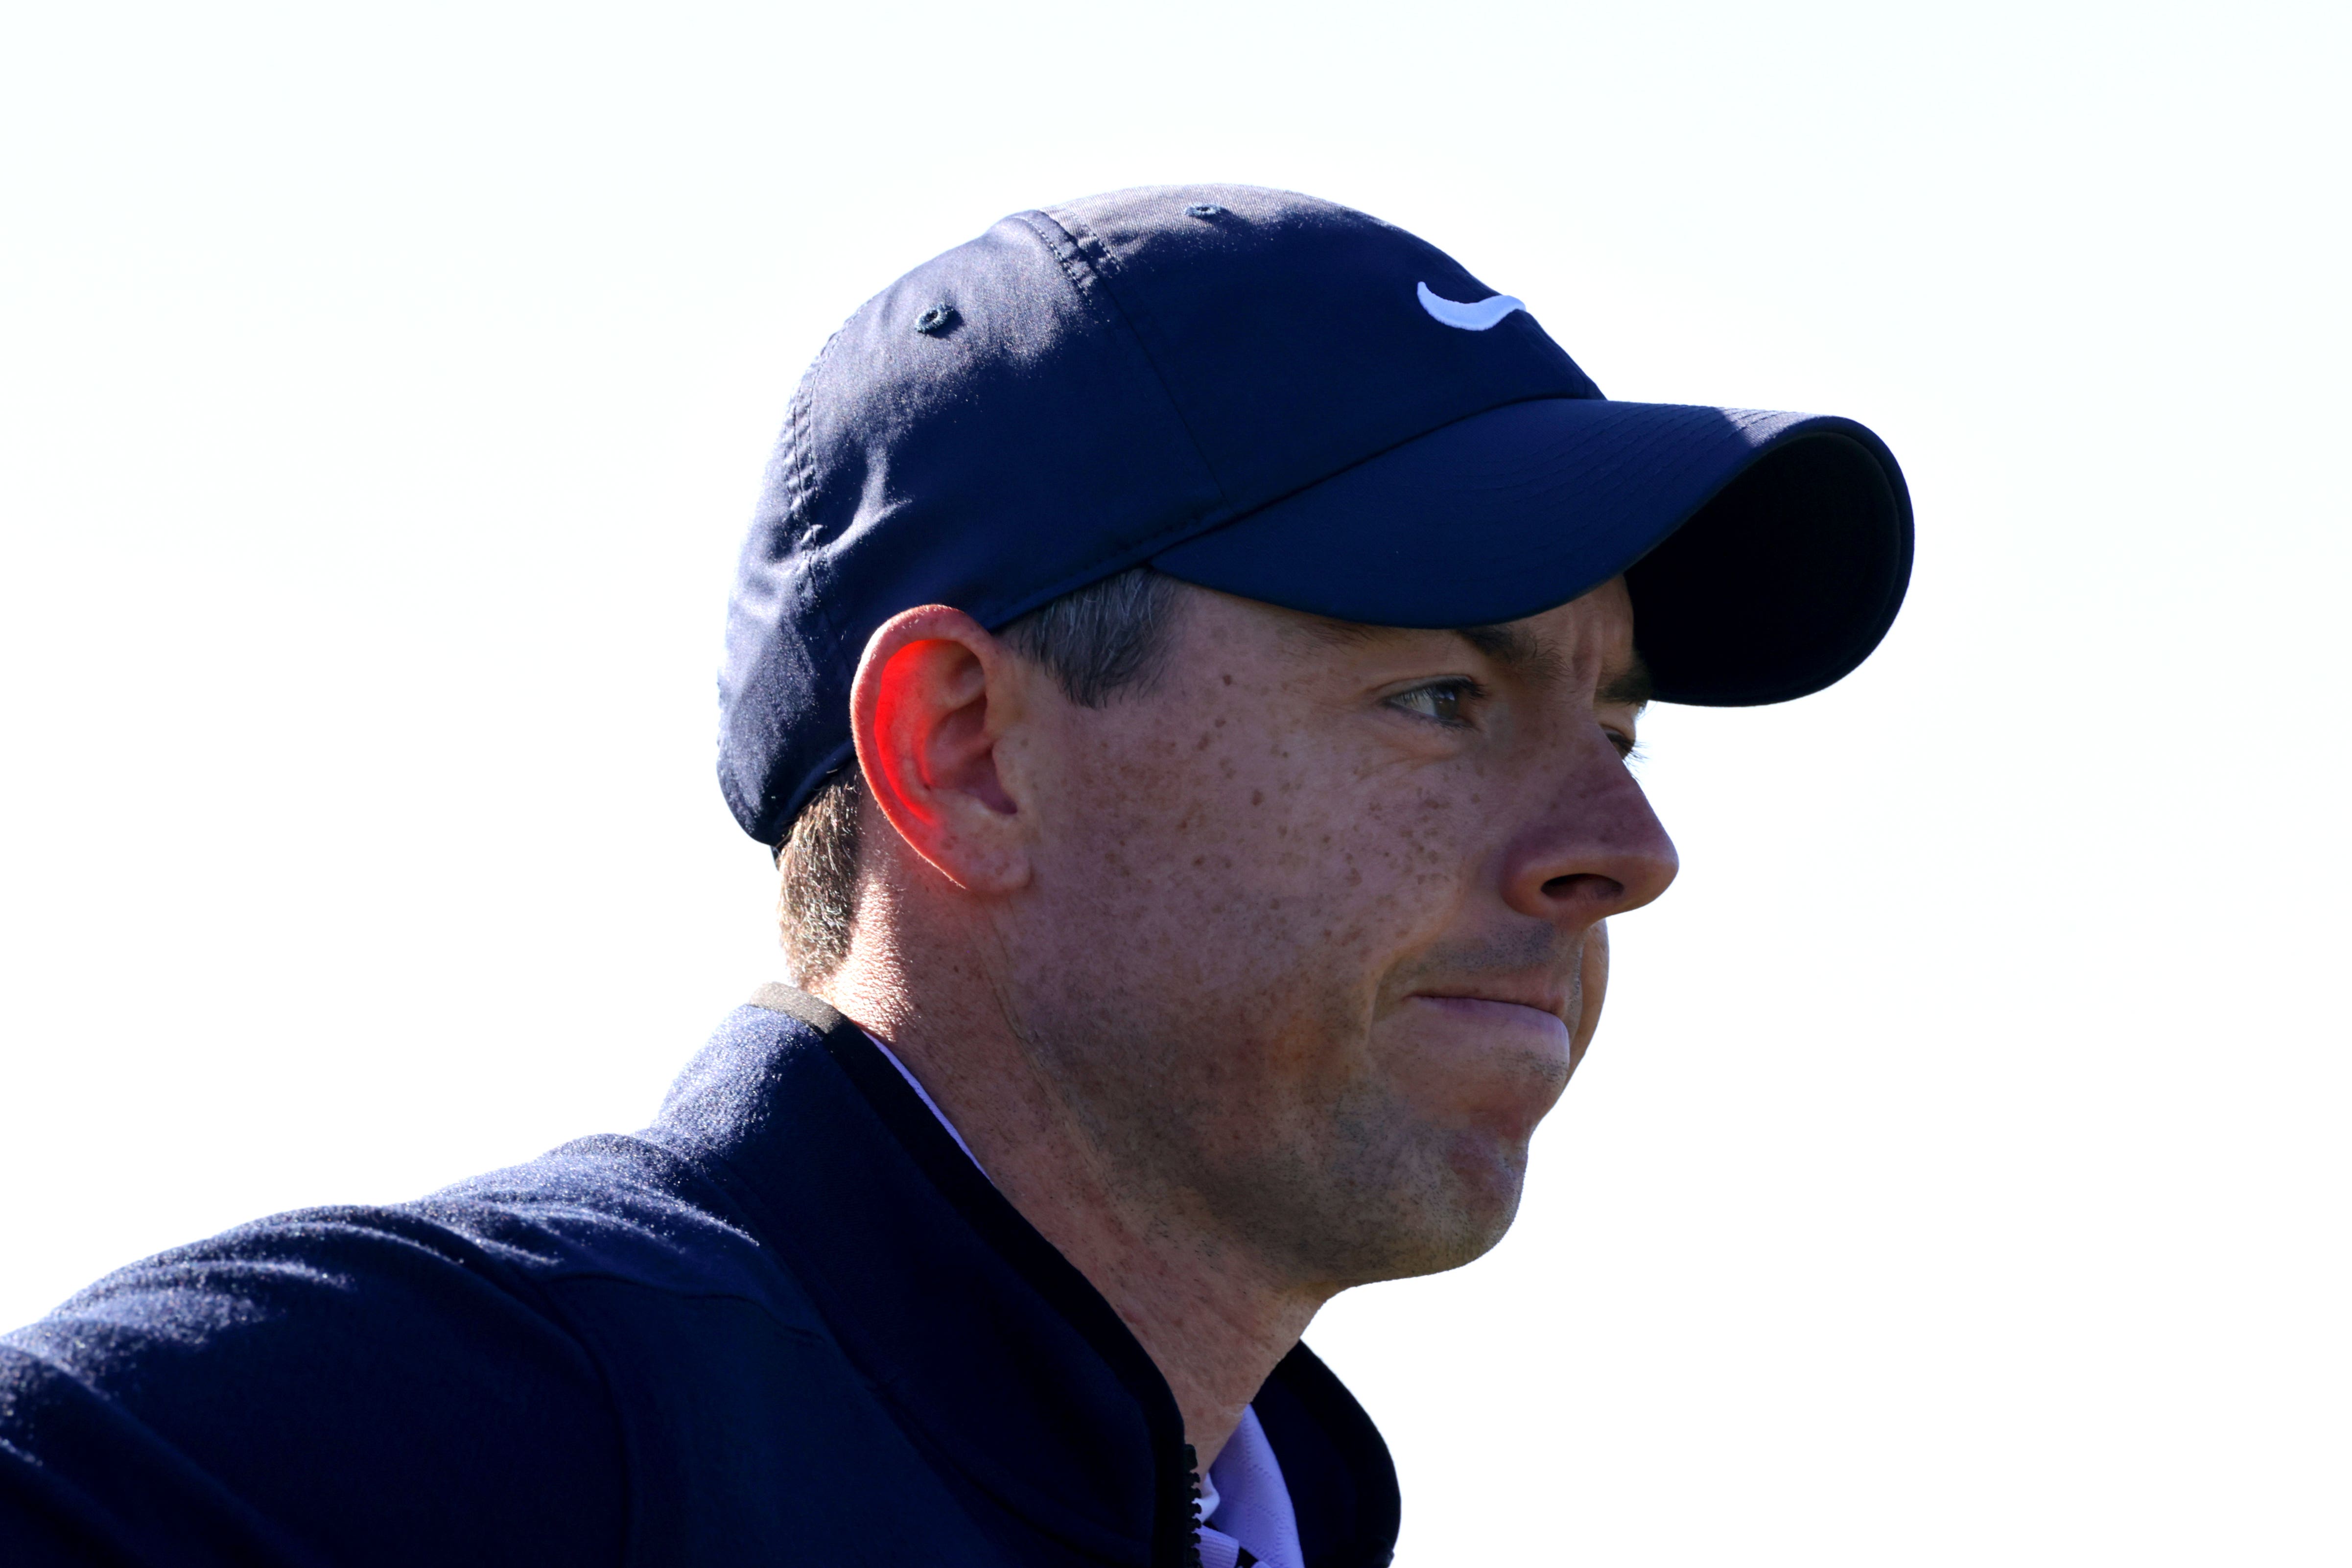 Rory McIlroy faces plenty of rivals to win the Masters, according to Curtis Strange (Steve Welsh/PA)